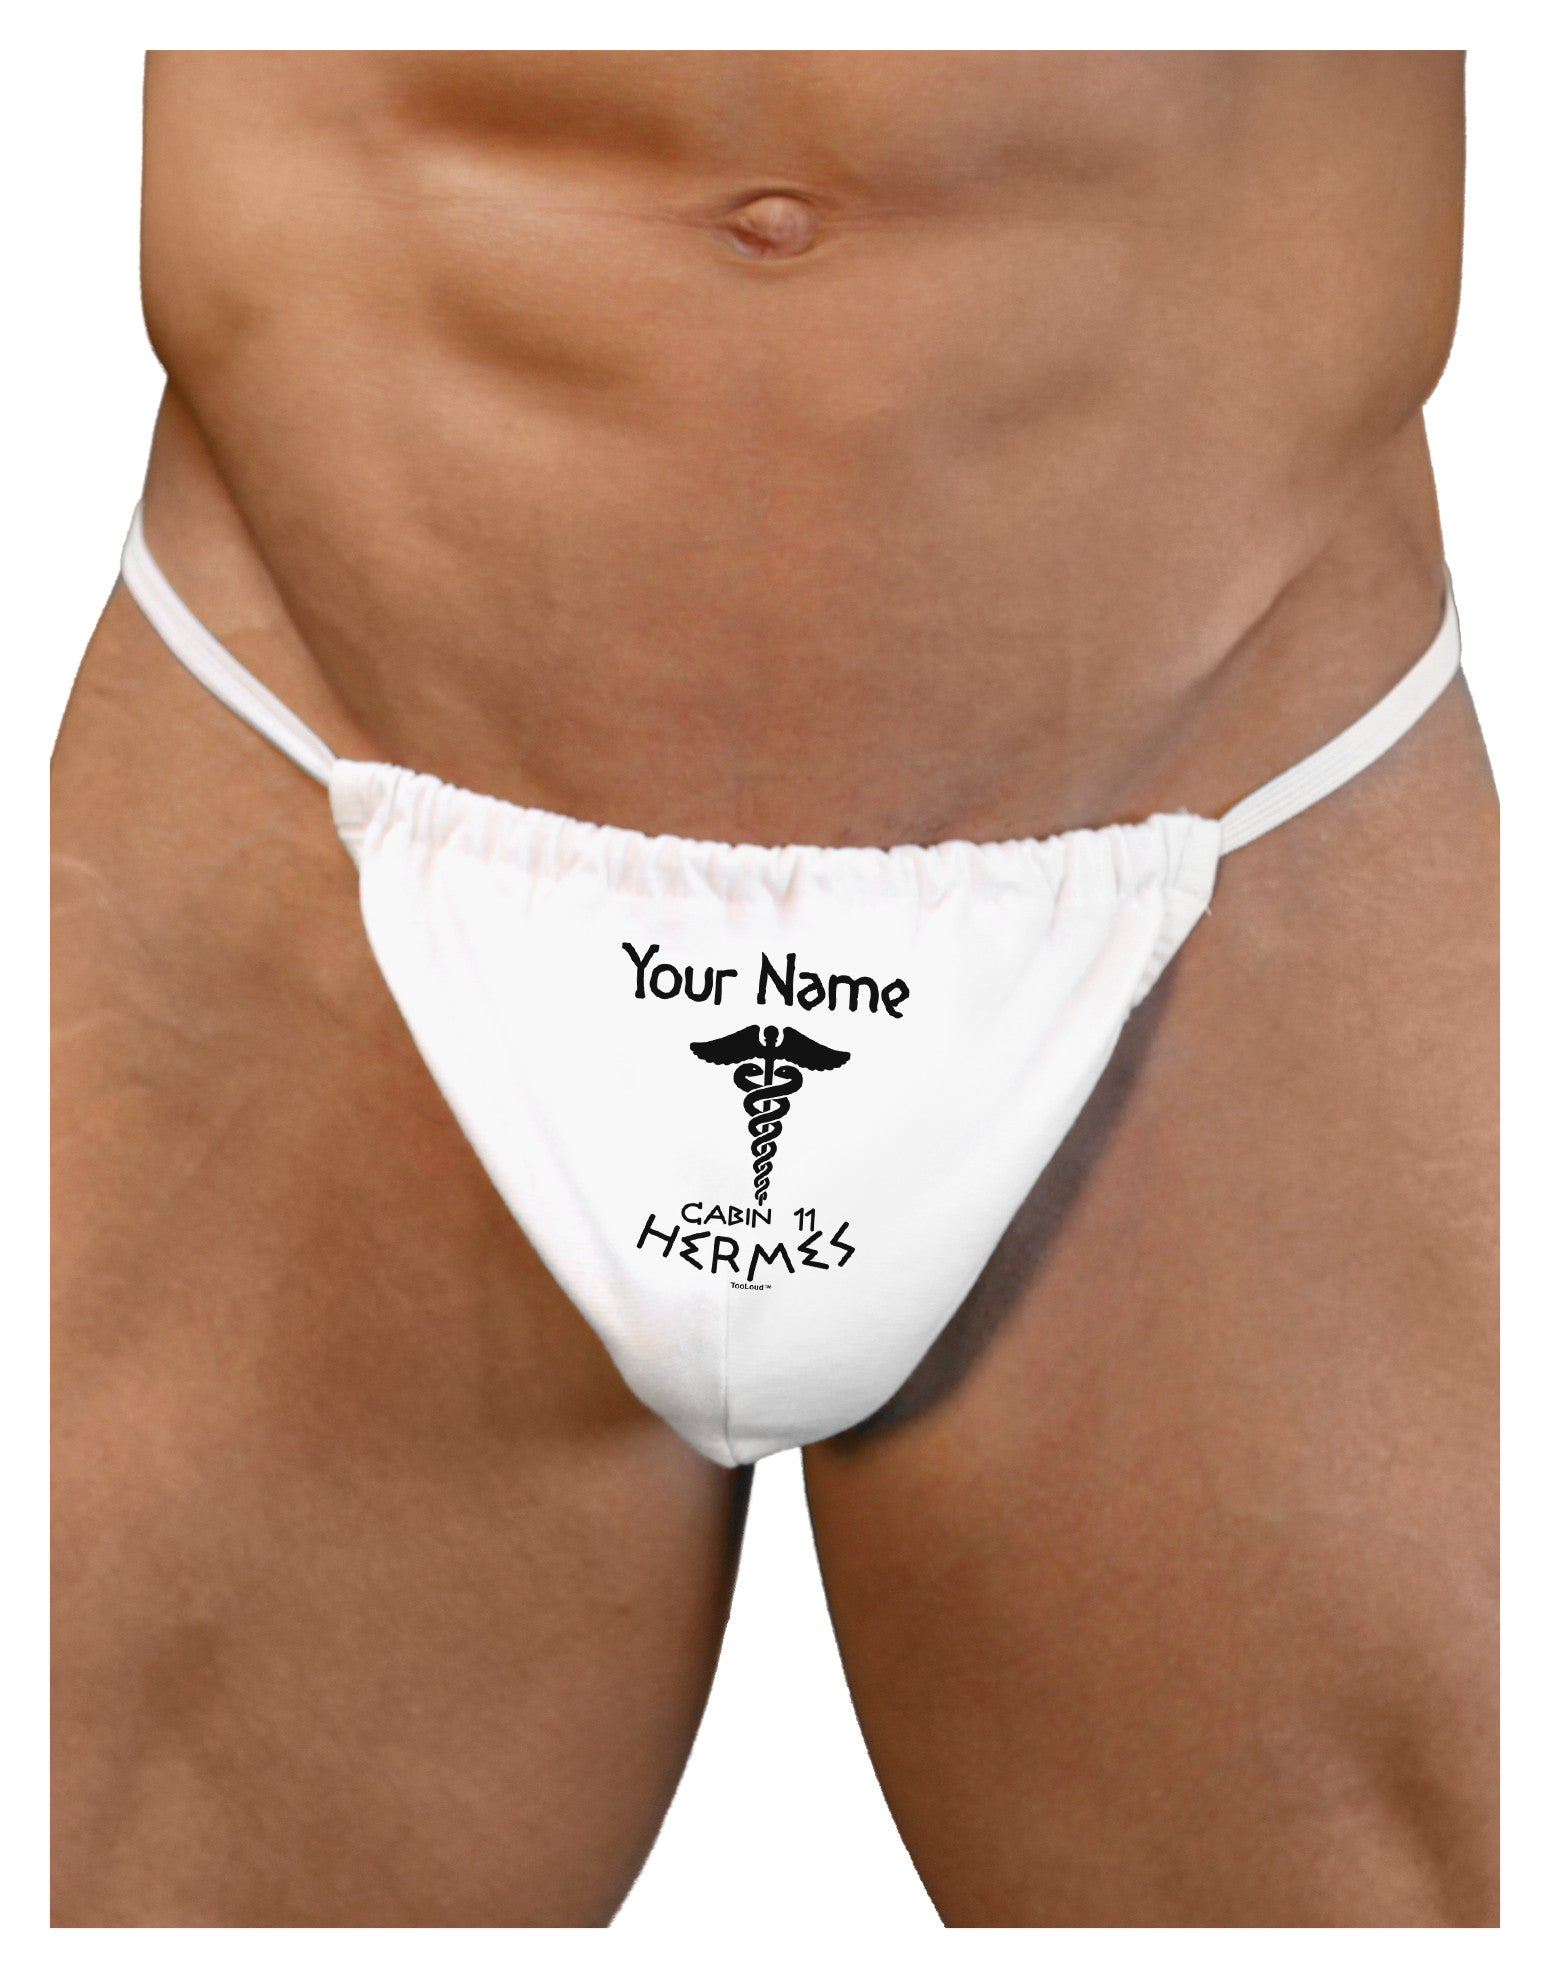 Personalized Cabin 11 Hermes Womens Thong Underwear by - Davson Sales